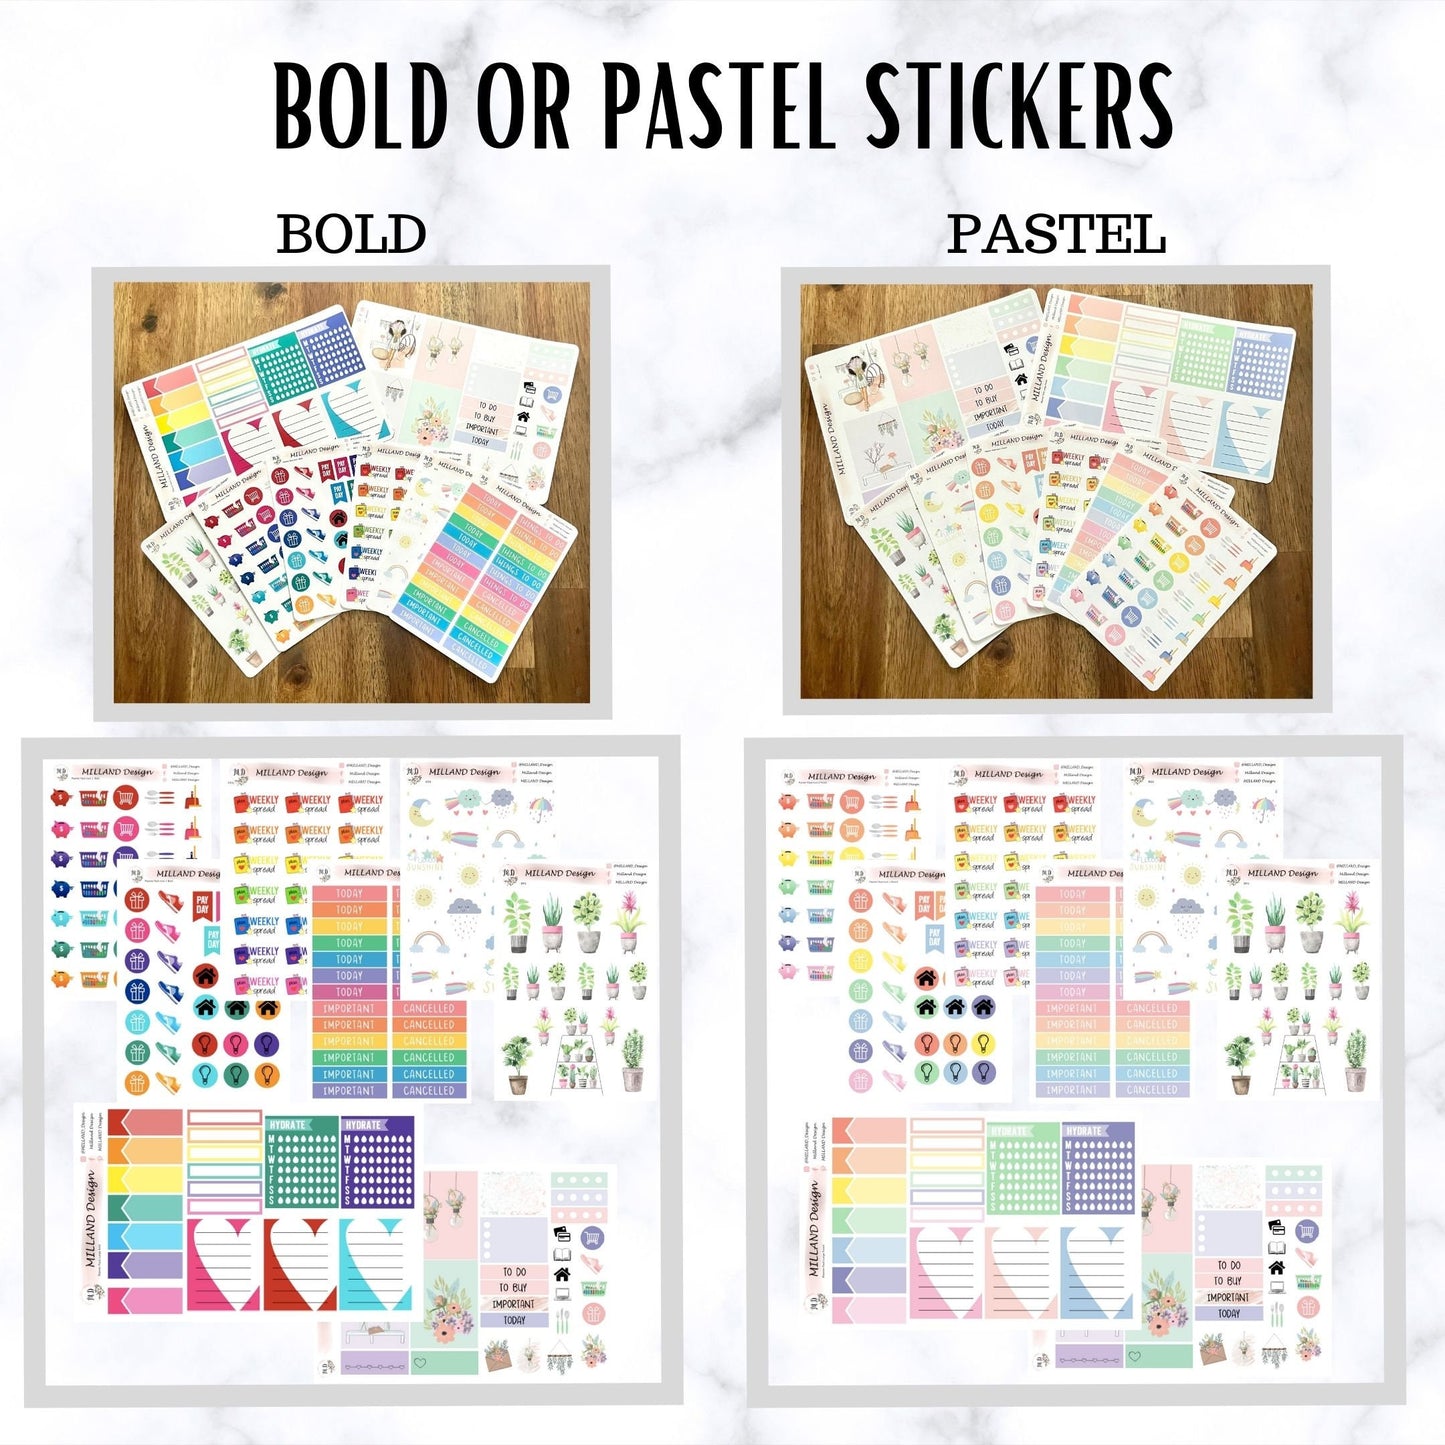 Planner Box - Stickers and Stationery